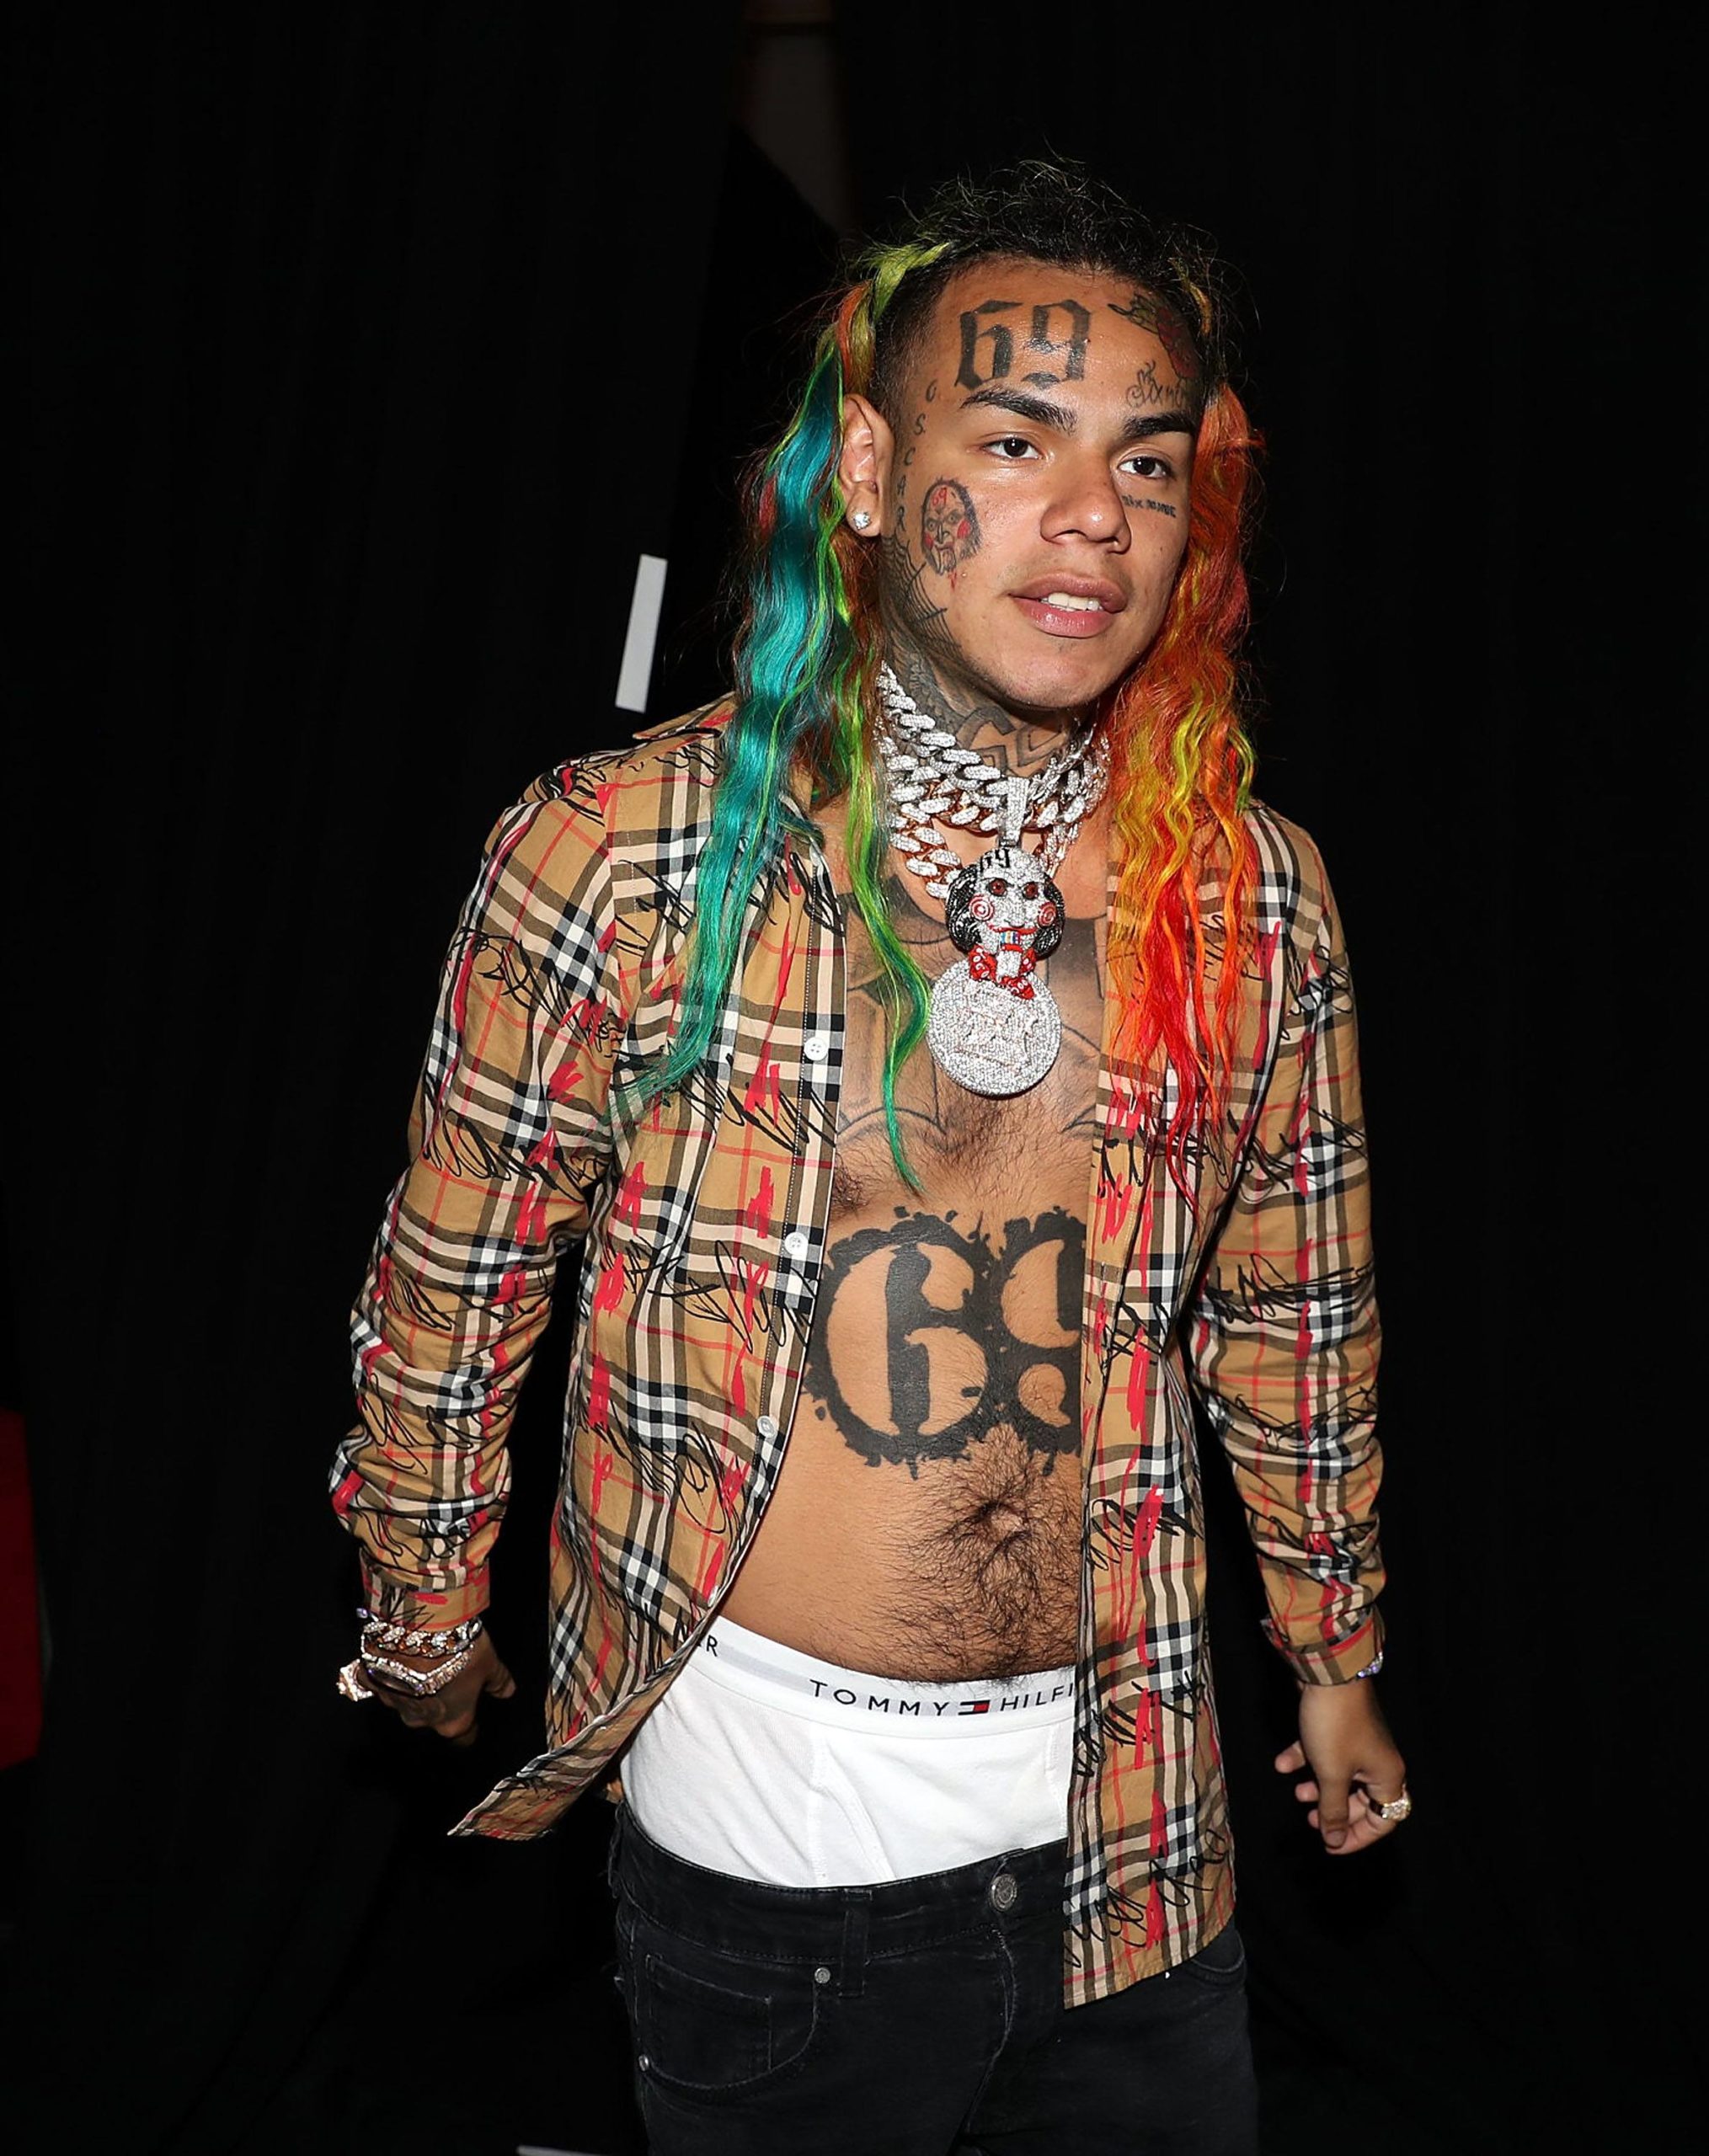 #TSRUpdatez: Tekashi 6ix9ine Has Been Sentenced To 4 Years Of Probation For...